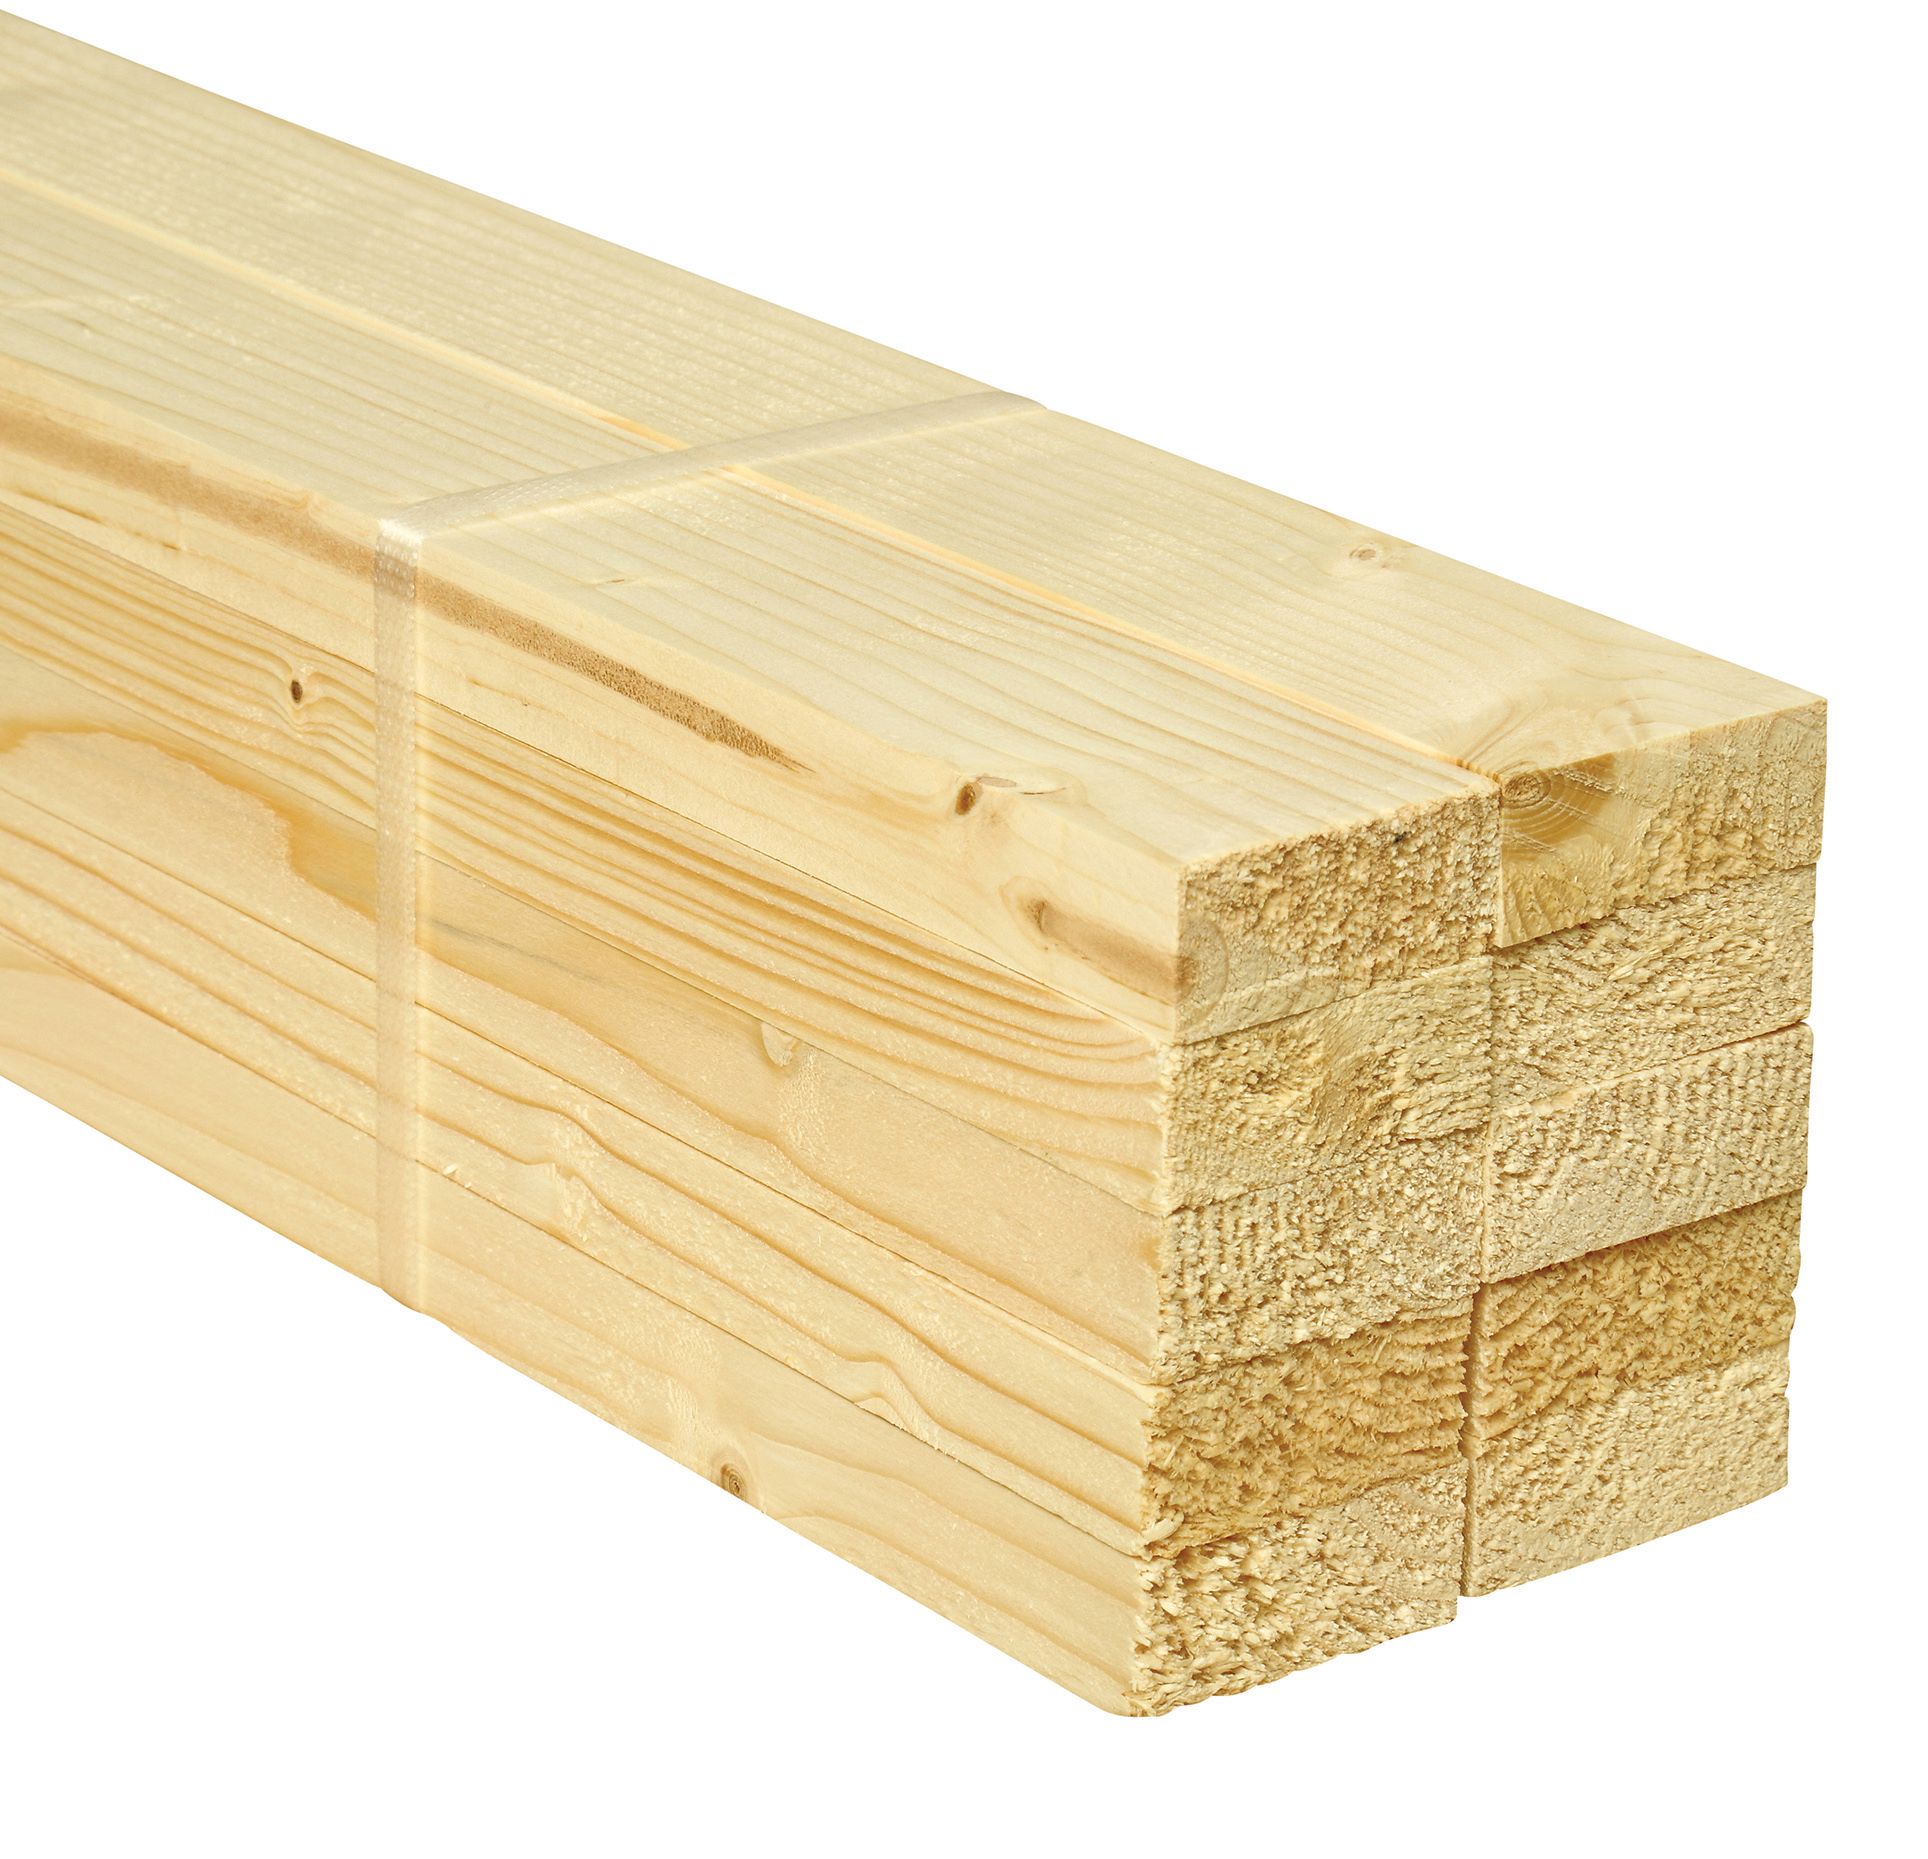 Wickes Whitewood PSE Timber - 18 x 44 x 2400mm - Pack of 10